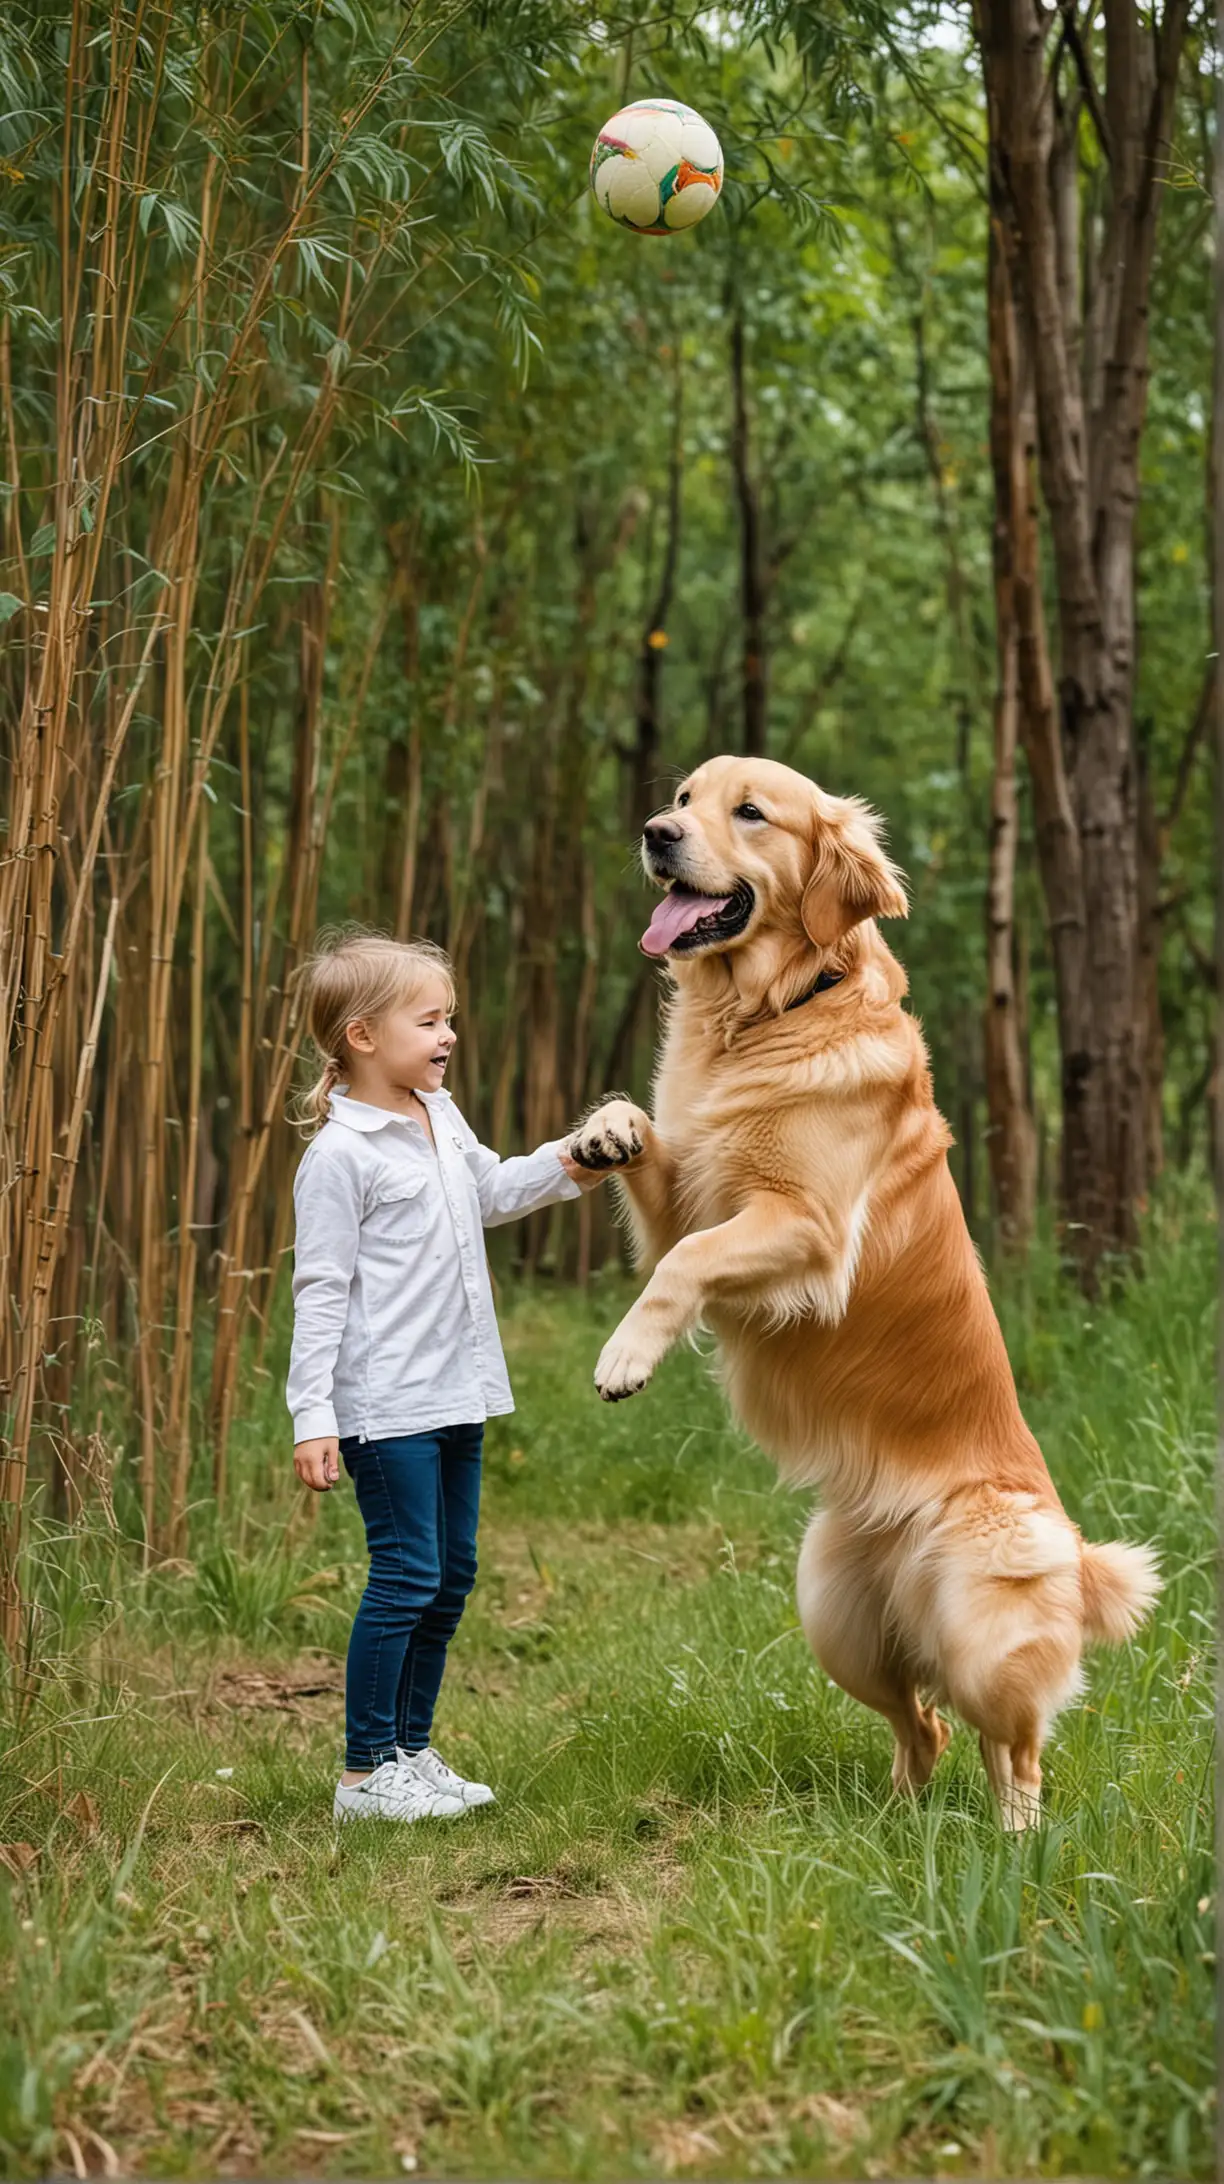 A cute golden retriever dog is playing ball with a young boy and a girl near a forest. The ball went in to the thick grasses and the kid was trying to fetch it back 